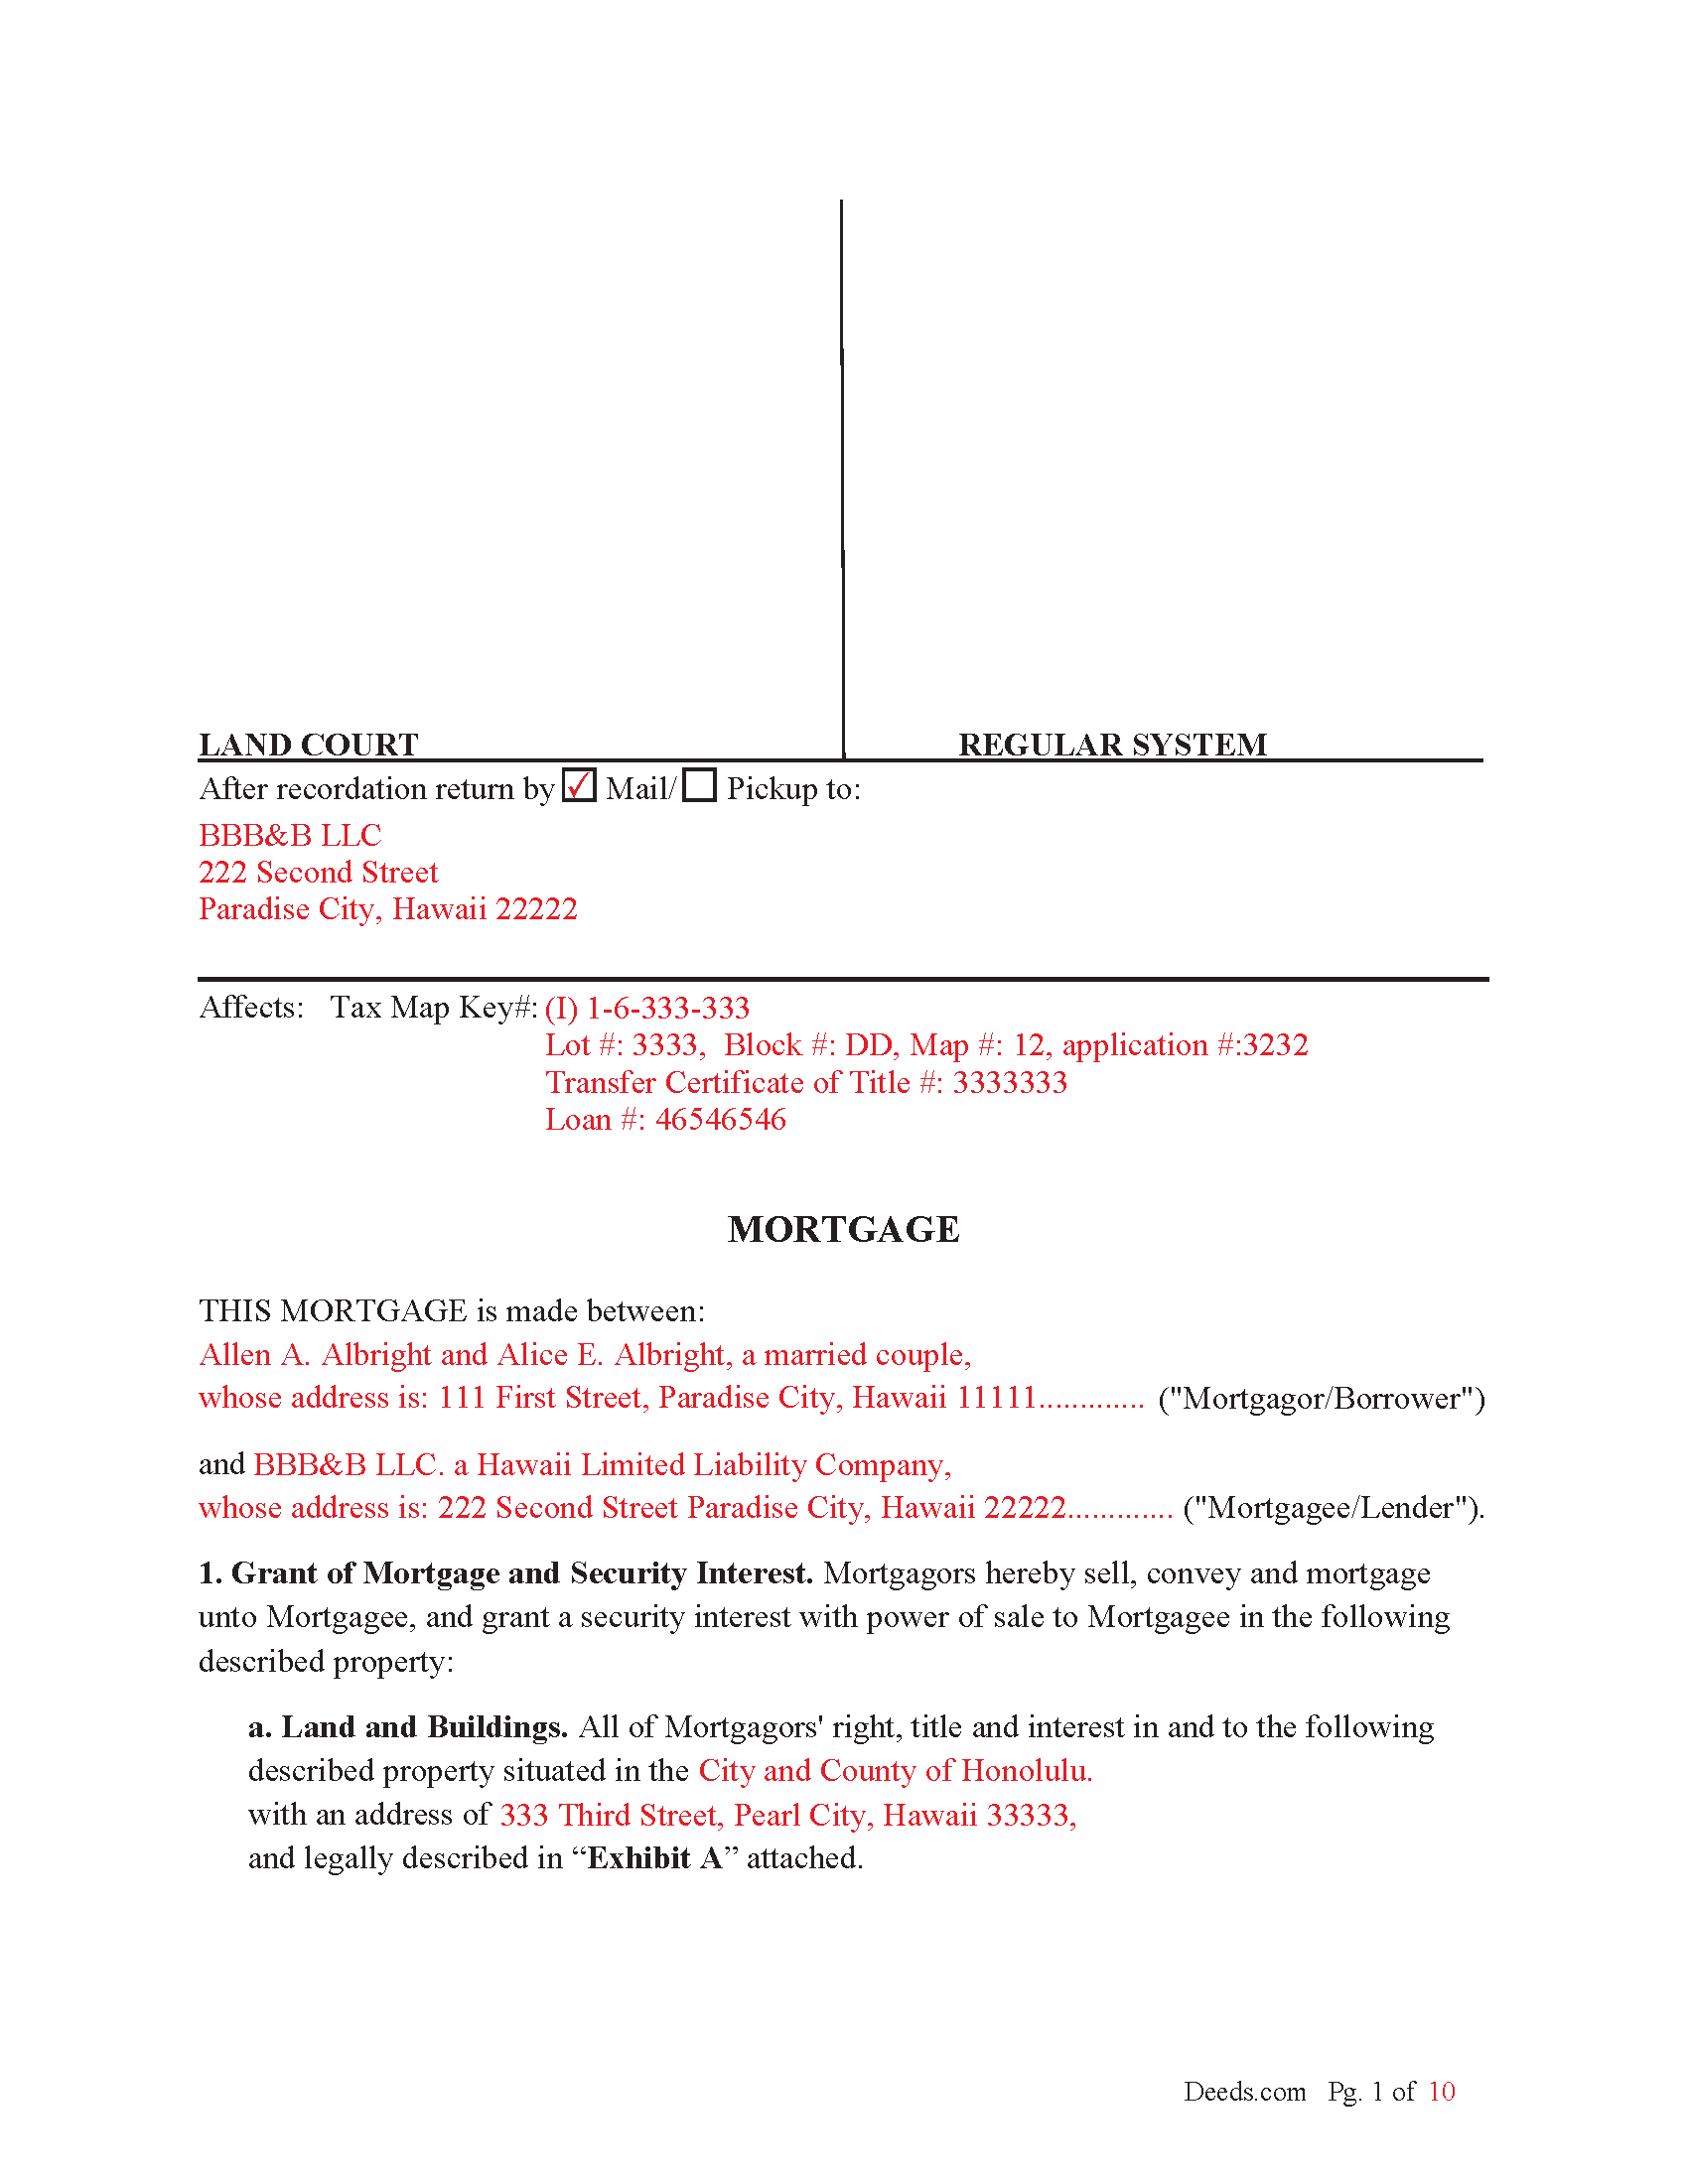 Completed Example of the Mortgage Document